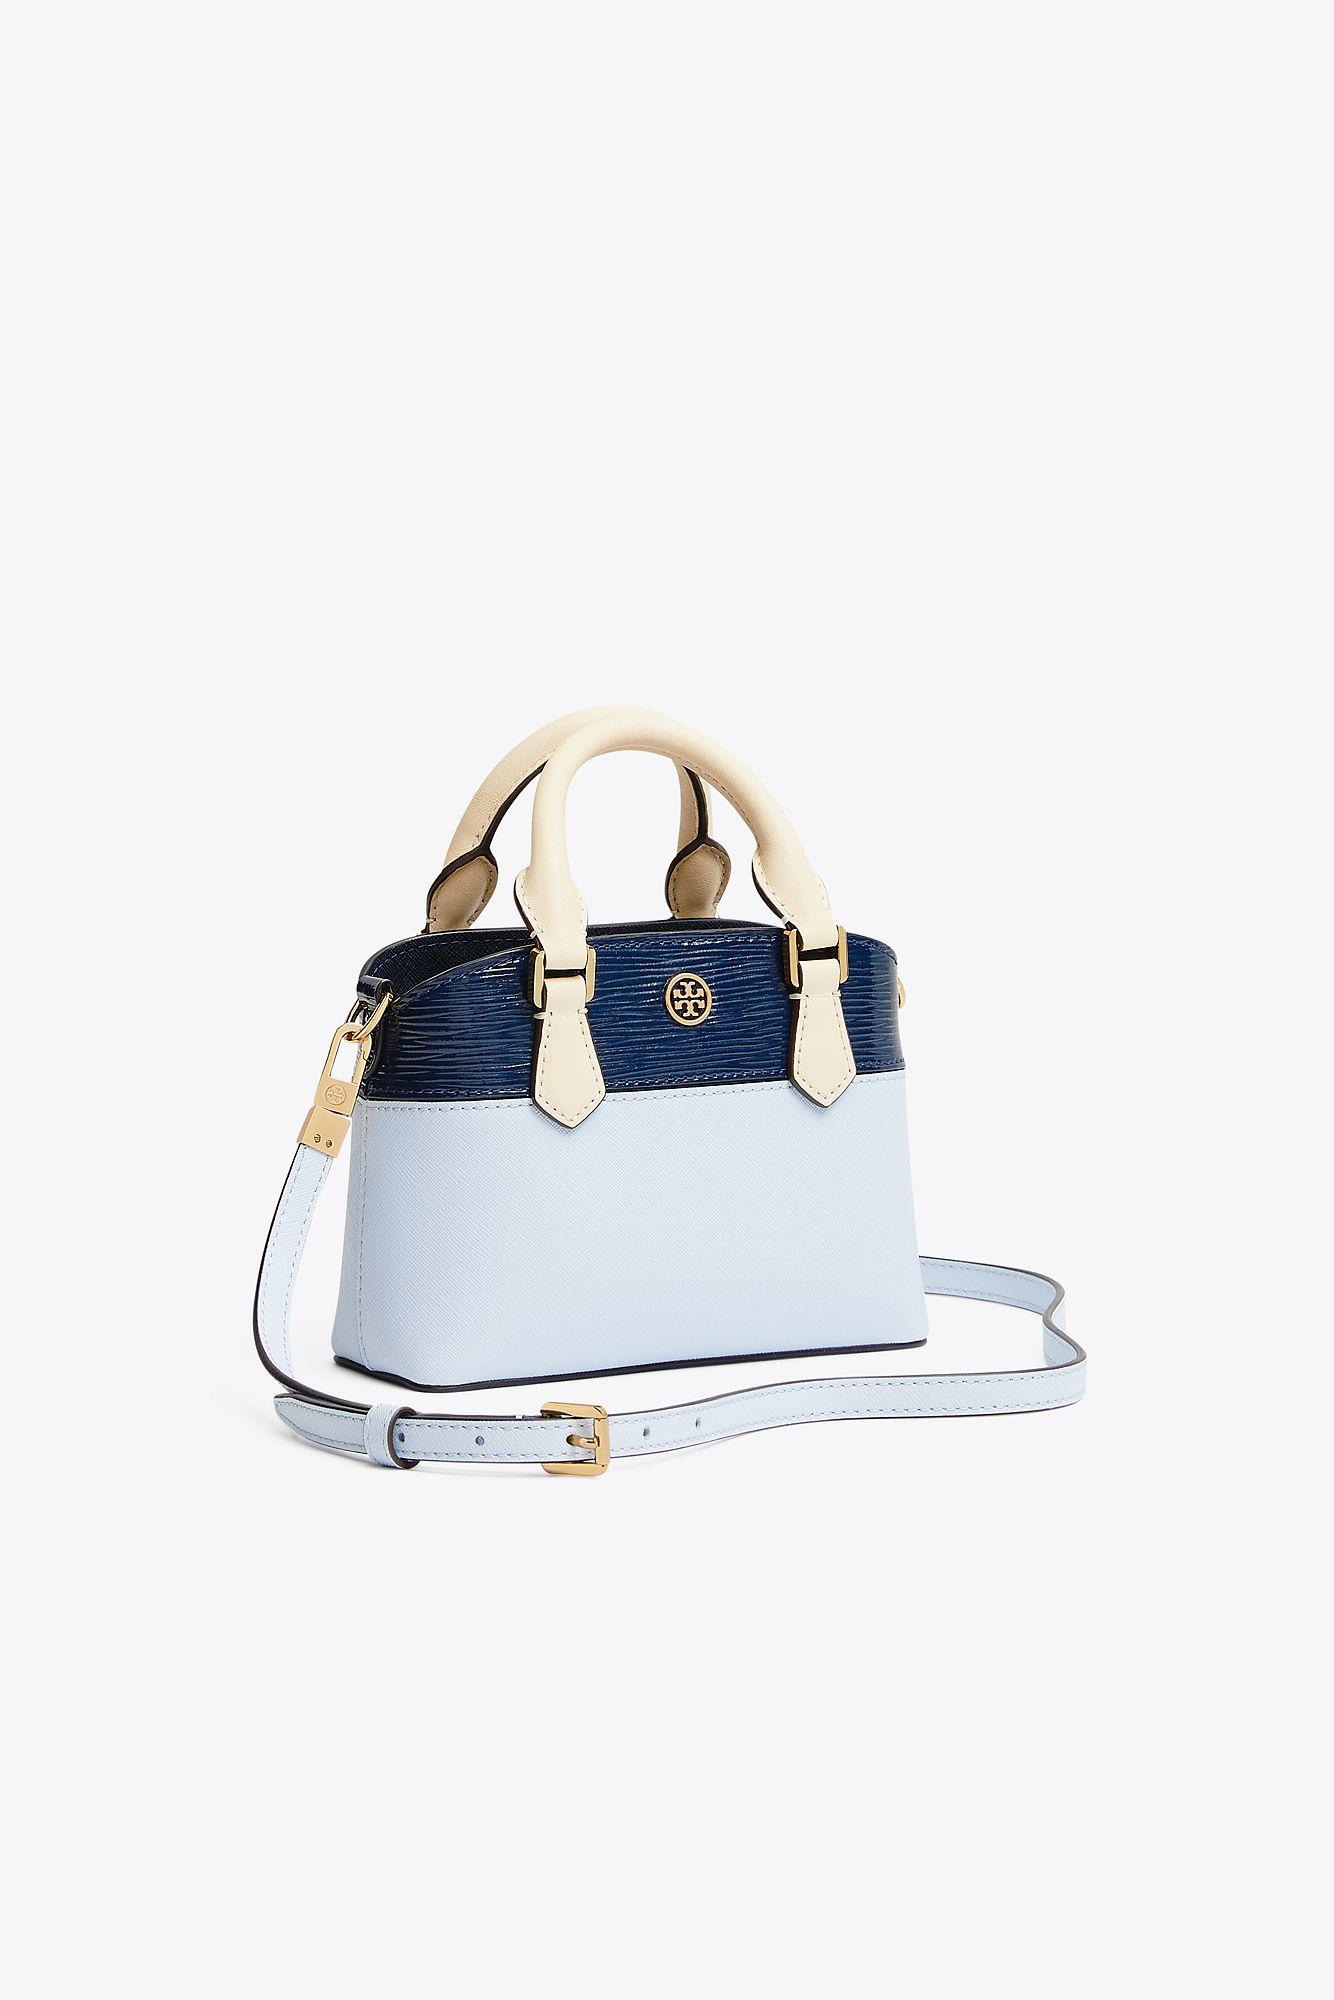 Tory Burch Leather Robinson Color-block Top-handle Mini Bag in 